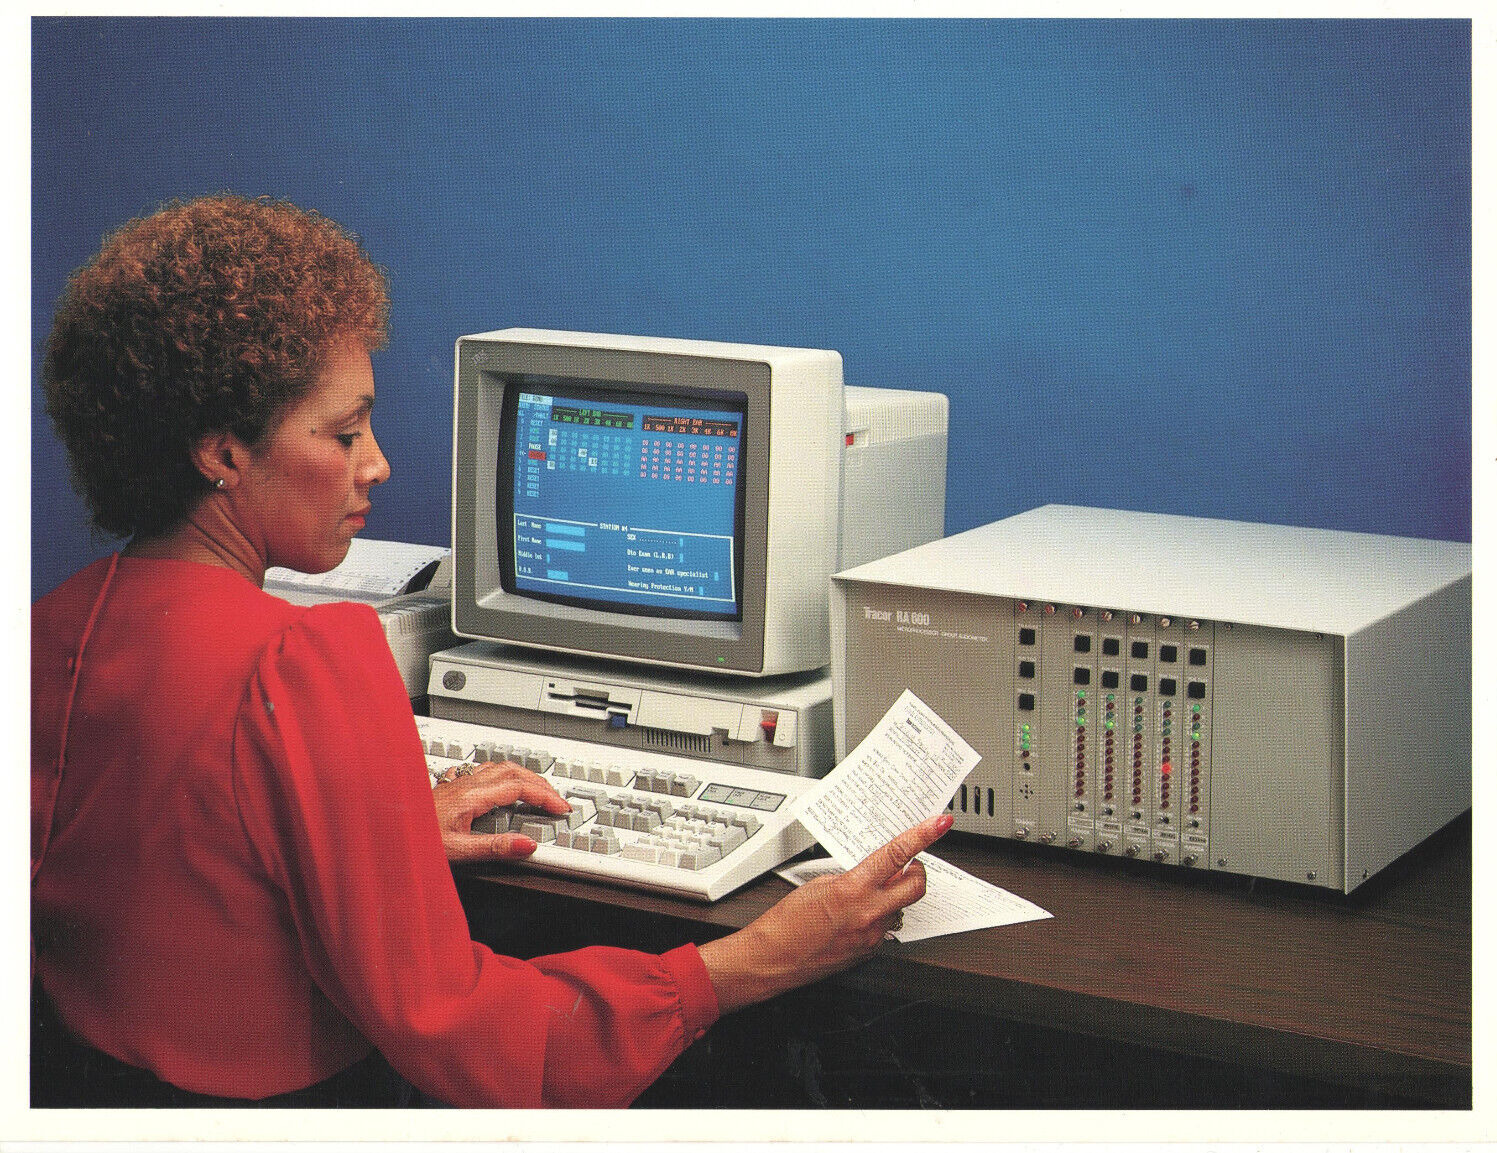 VINTAGE 1980s COLOR PHOTOGRAPH WOMAN USING EARLY IBM PERSONAL COMPUTER 8.5x11